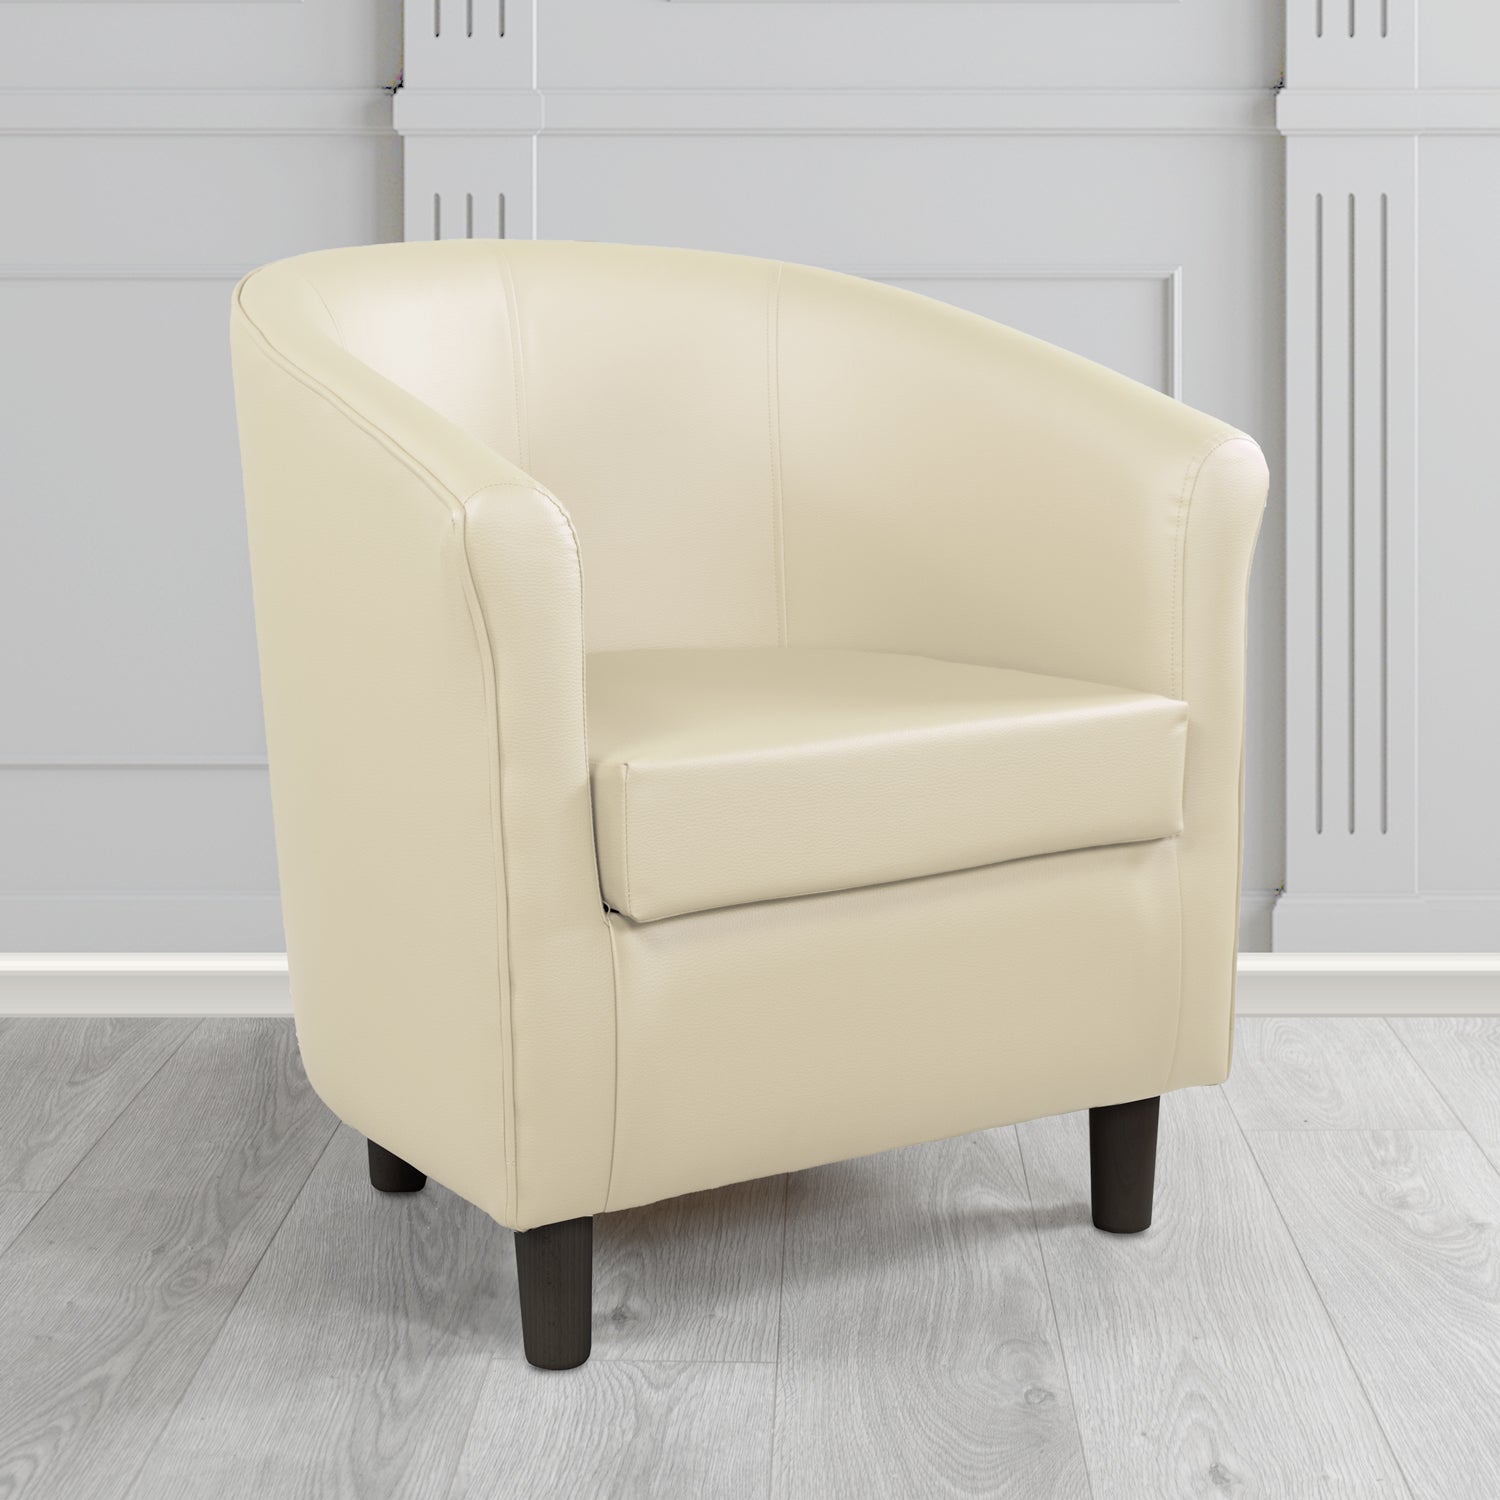 Tuscany Tub Chair in Madrid Cream Faux Leather - The Tub Chair Shop